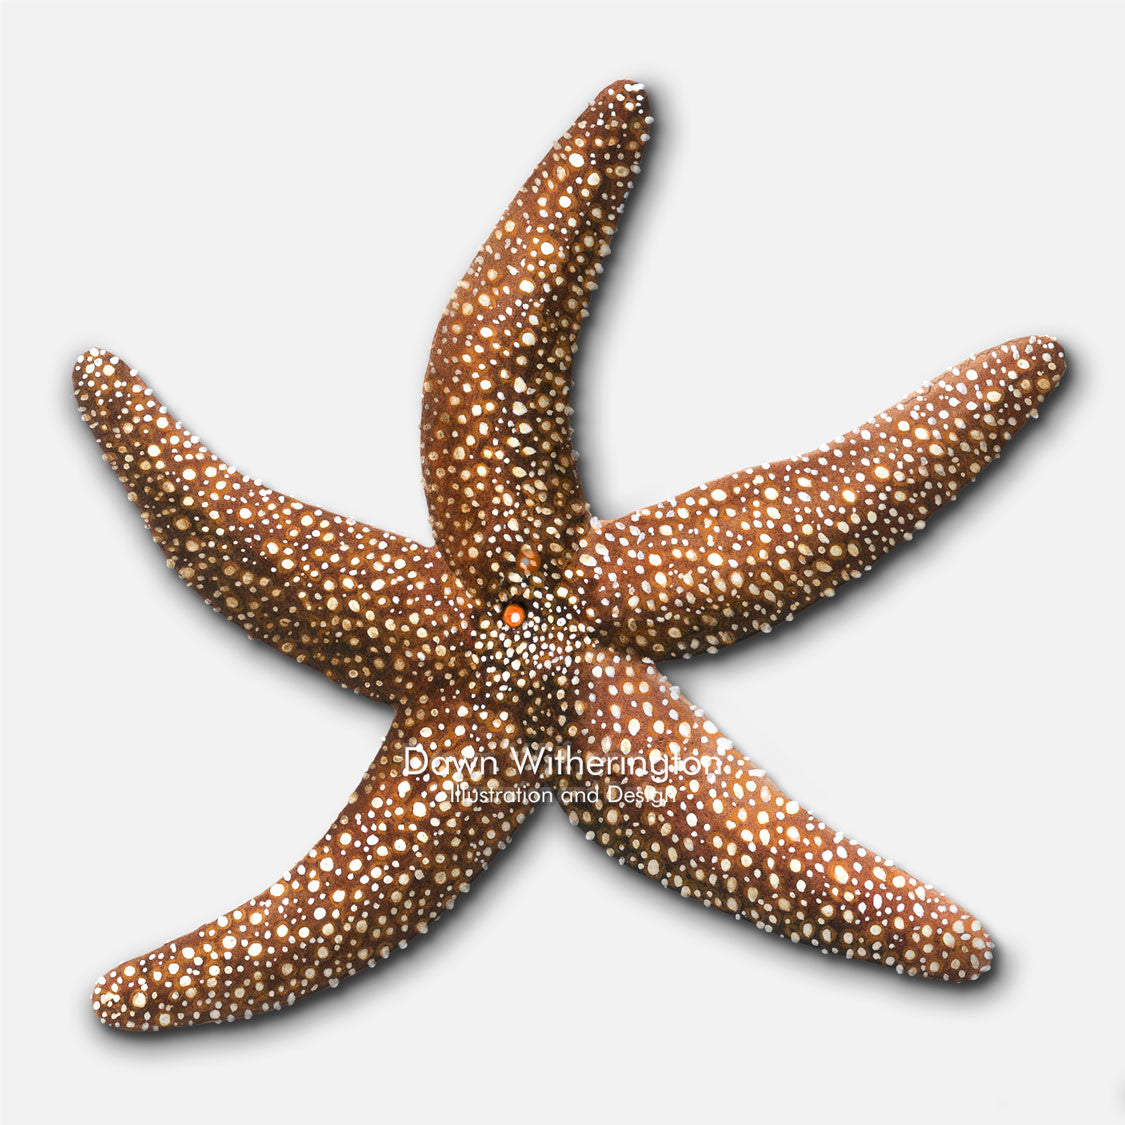 This beautiful illustration of a common sea star, Asterias rubens, is accurate in detail.